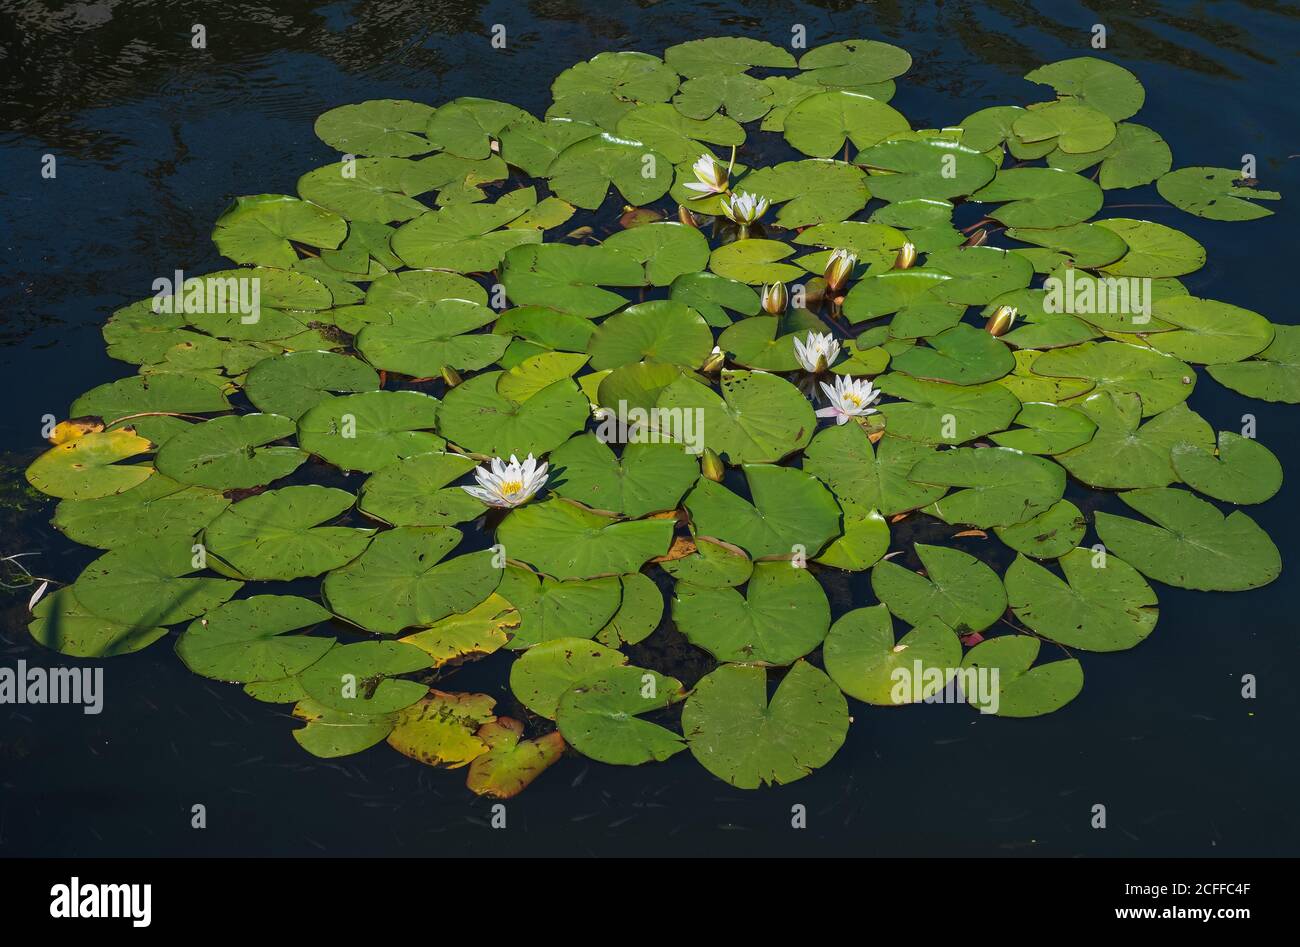 Nymphaea odorata Alba. Waterlilys or lotuses flower blooms in a pond or river. Close-up of a nymphea Marliacea Albida in a garden pond on the water su Stock Photo